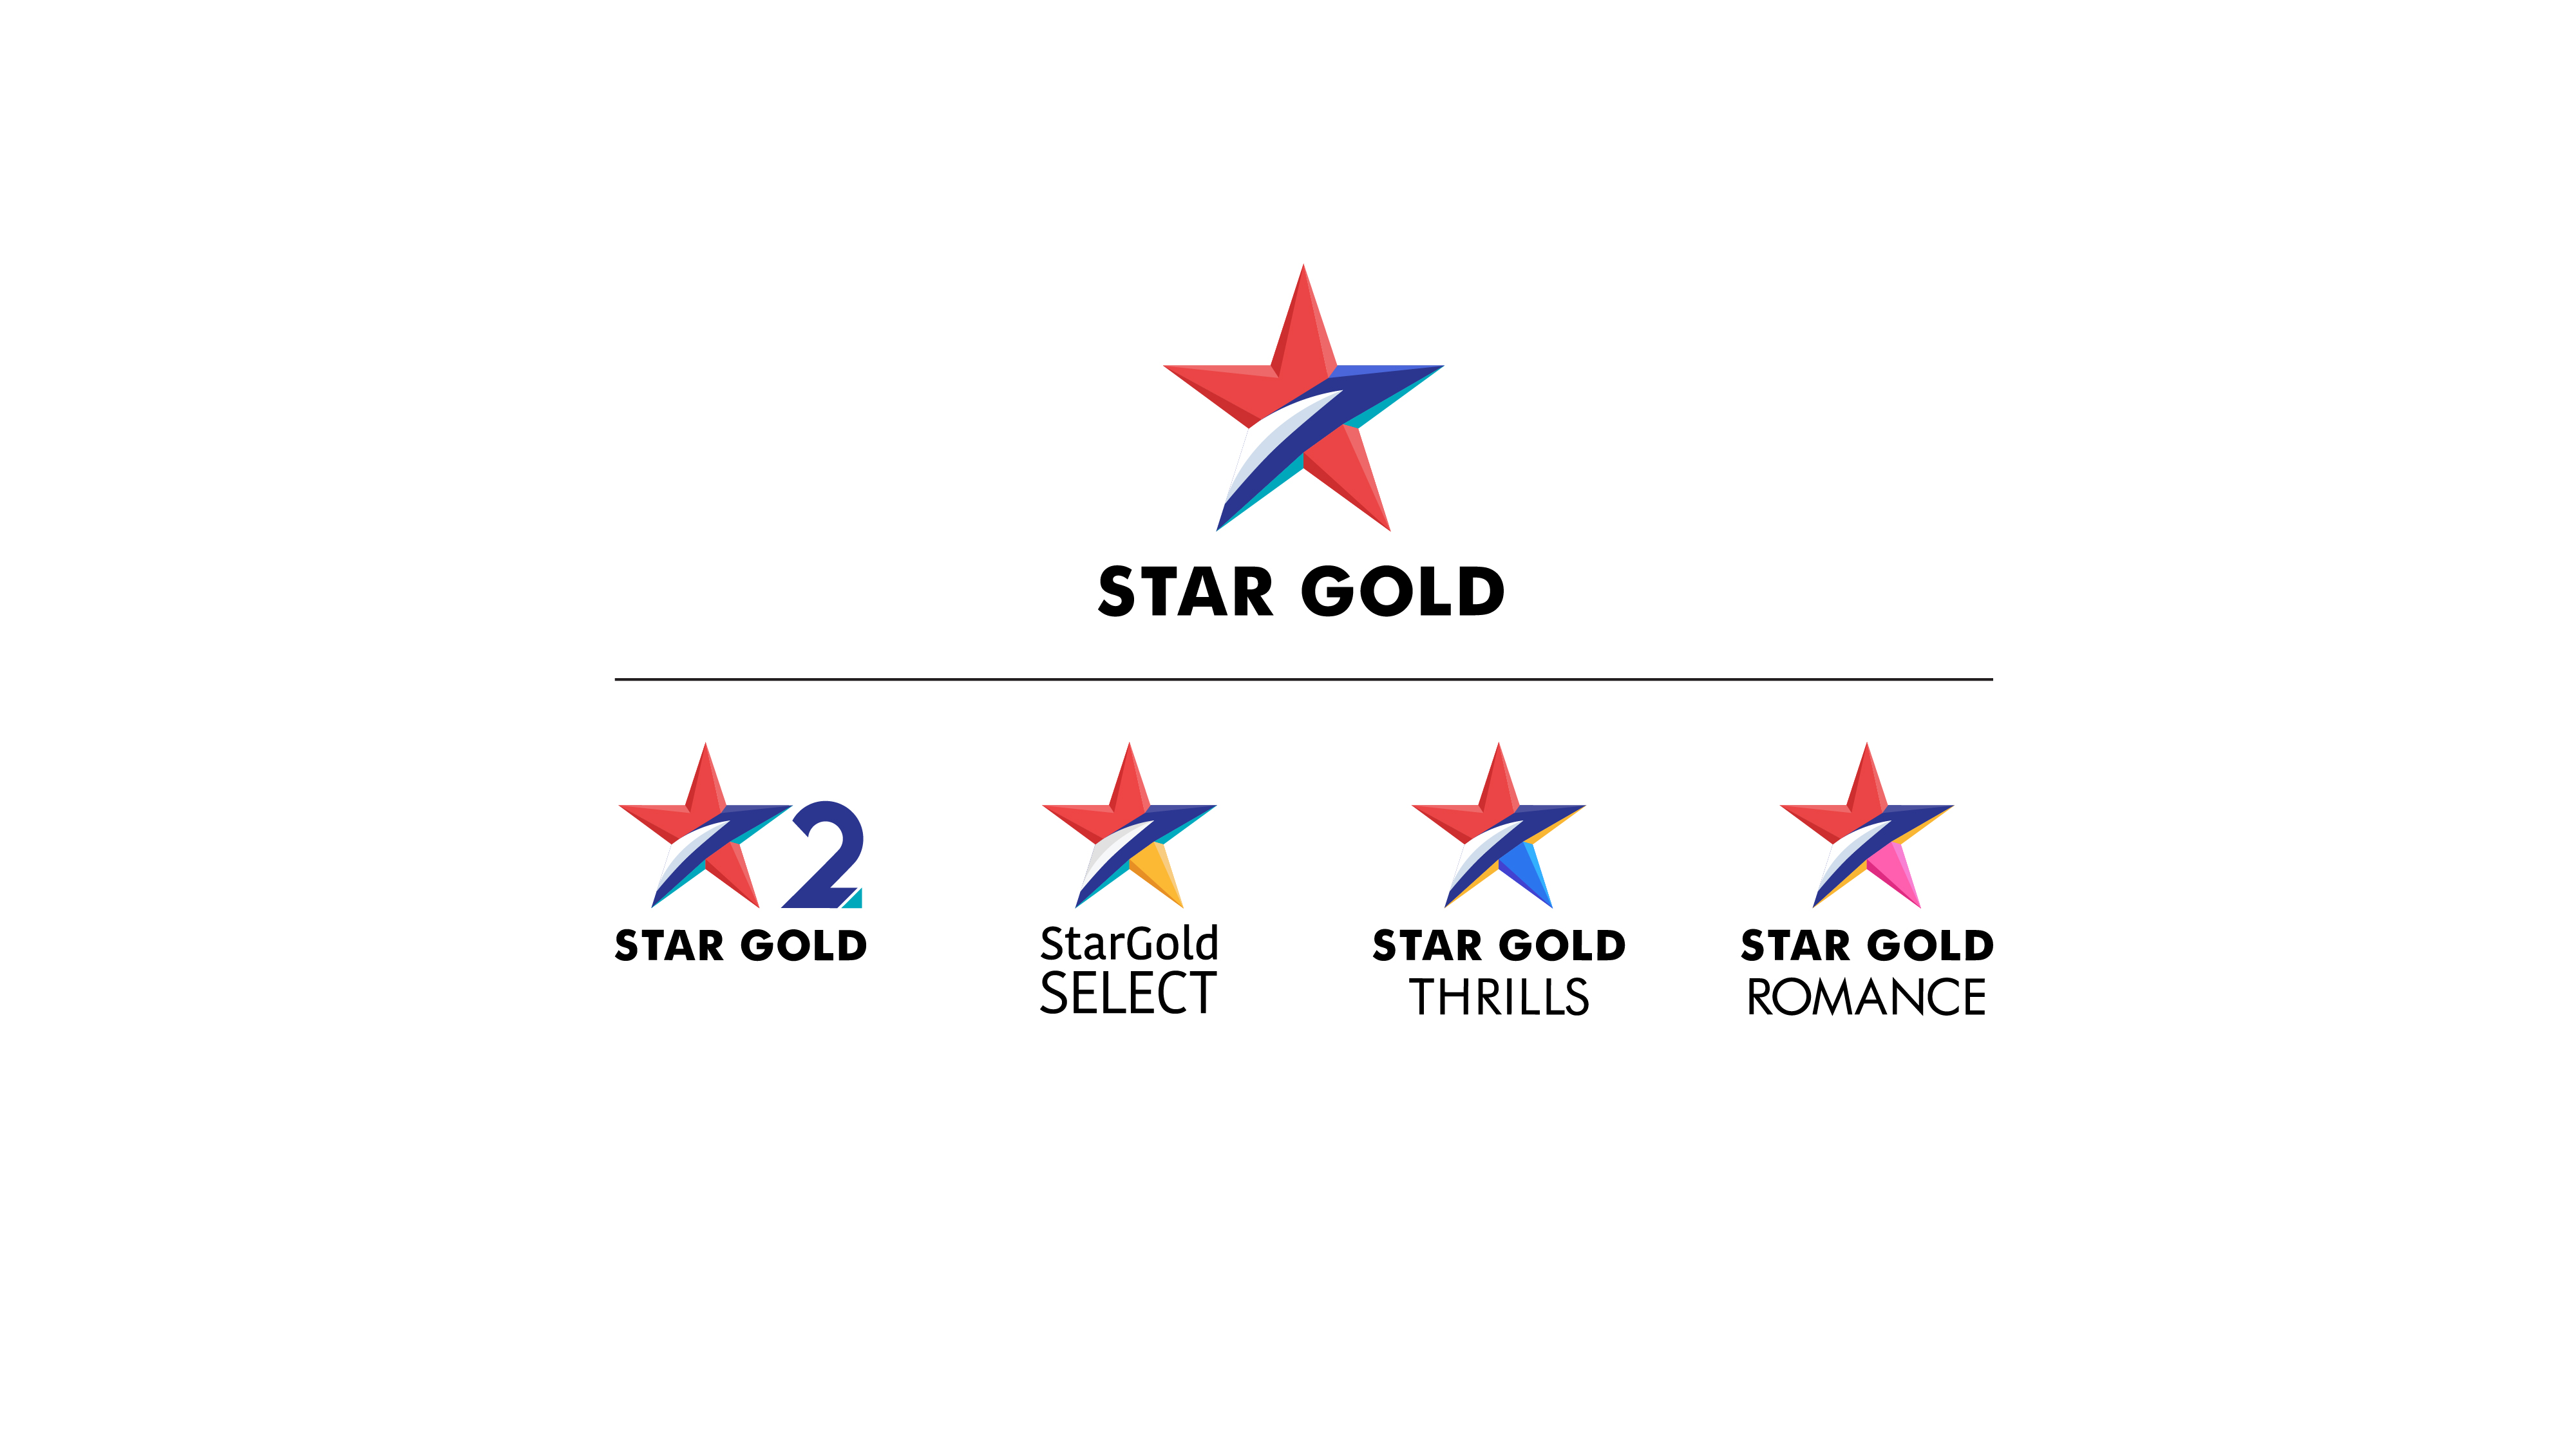 DISNEY STAR NETWORK EXPANDS ITS STAR GOLD PORTFOLIO WITH THE LAUNCH OF STAR GOLD THRILLS AND STAR GOLD ROMANCE decoding=